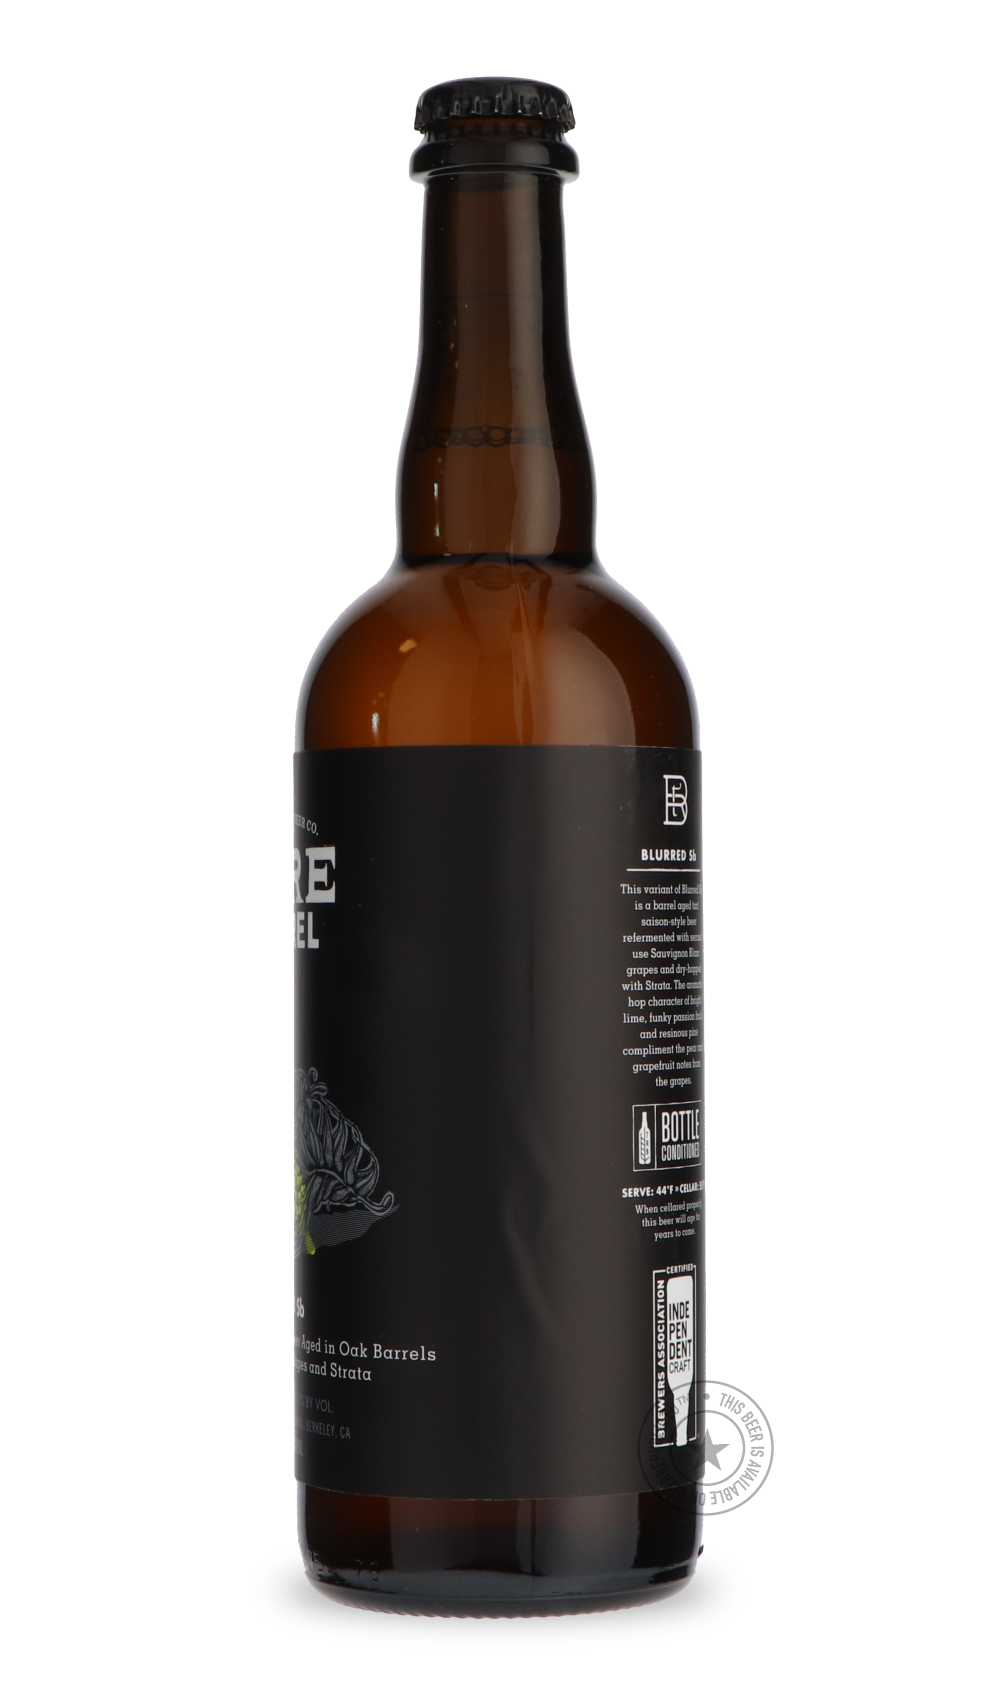 -The Rare Barrel- Blurred Sb Dry Hopped '19-Sour / Wild & Fruity- Only @ Beer Republic - The best online beer store for American & Canadian craft beer - Buy beer online from the USA and Canada - Bier online kopen - Amerikaans bier kopen - Craft beer store - Craft beer kopen - Amerikanisch bier kaufen - Bier online kaufen - Acheter biere online - IPA - Stout - Porter - New England IPA - Hazy IPA - Imperial Stout - Barrel Aged - Barrel Aged Imperial Stout - Brown - Dark beer - Blond - Blonde - Pilsner - Lager